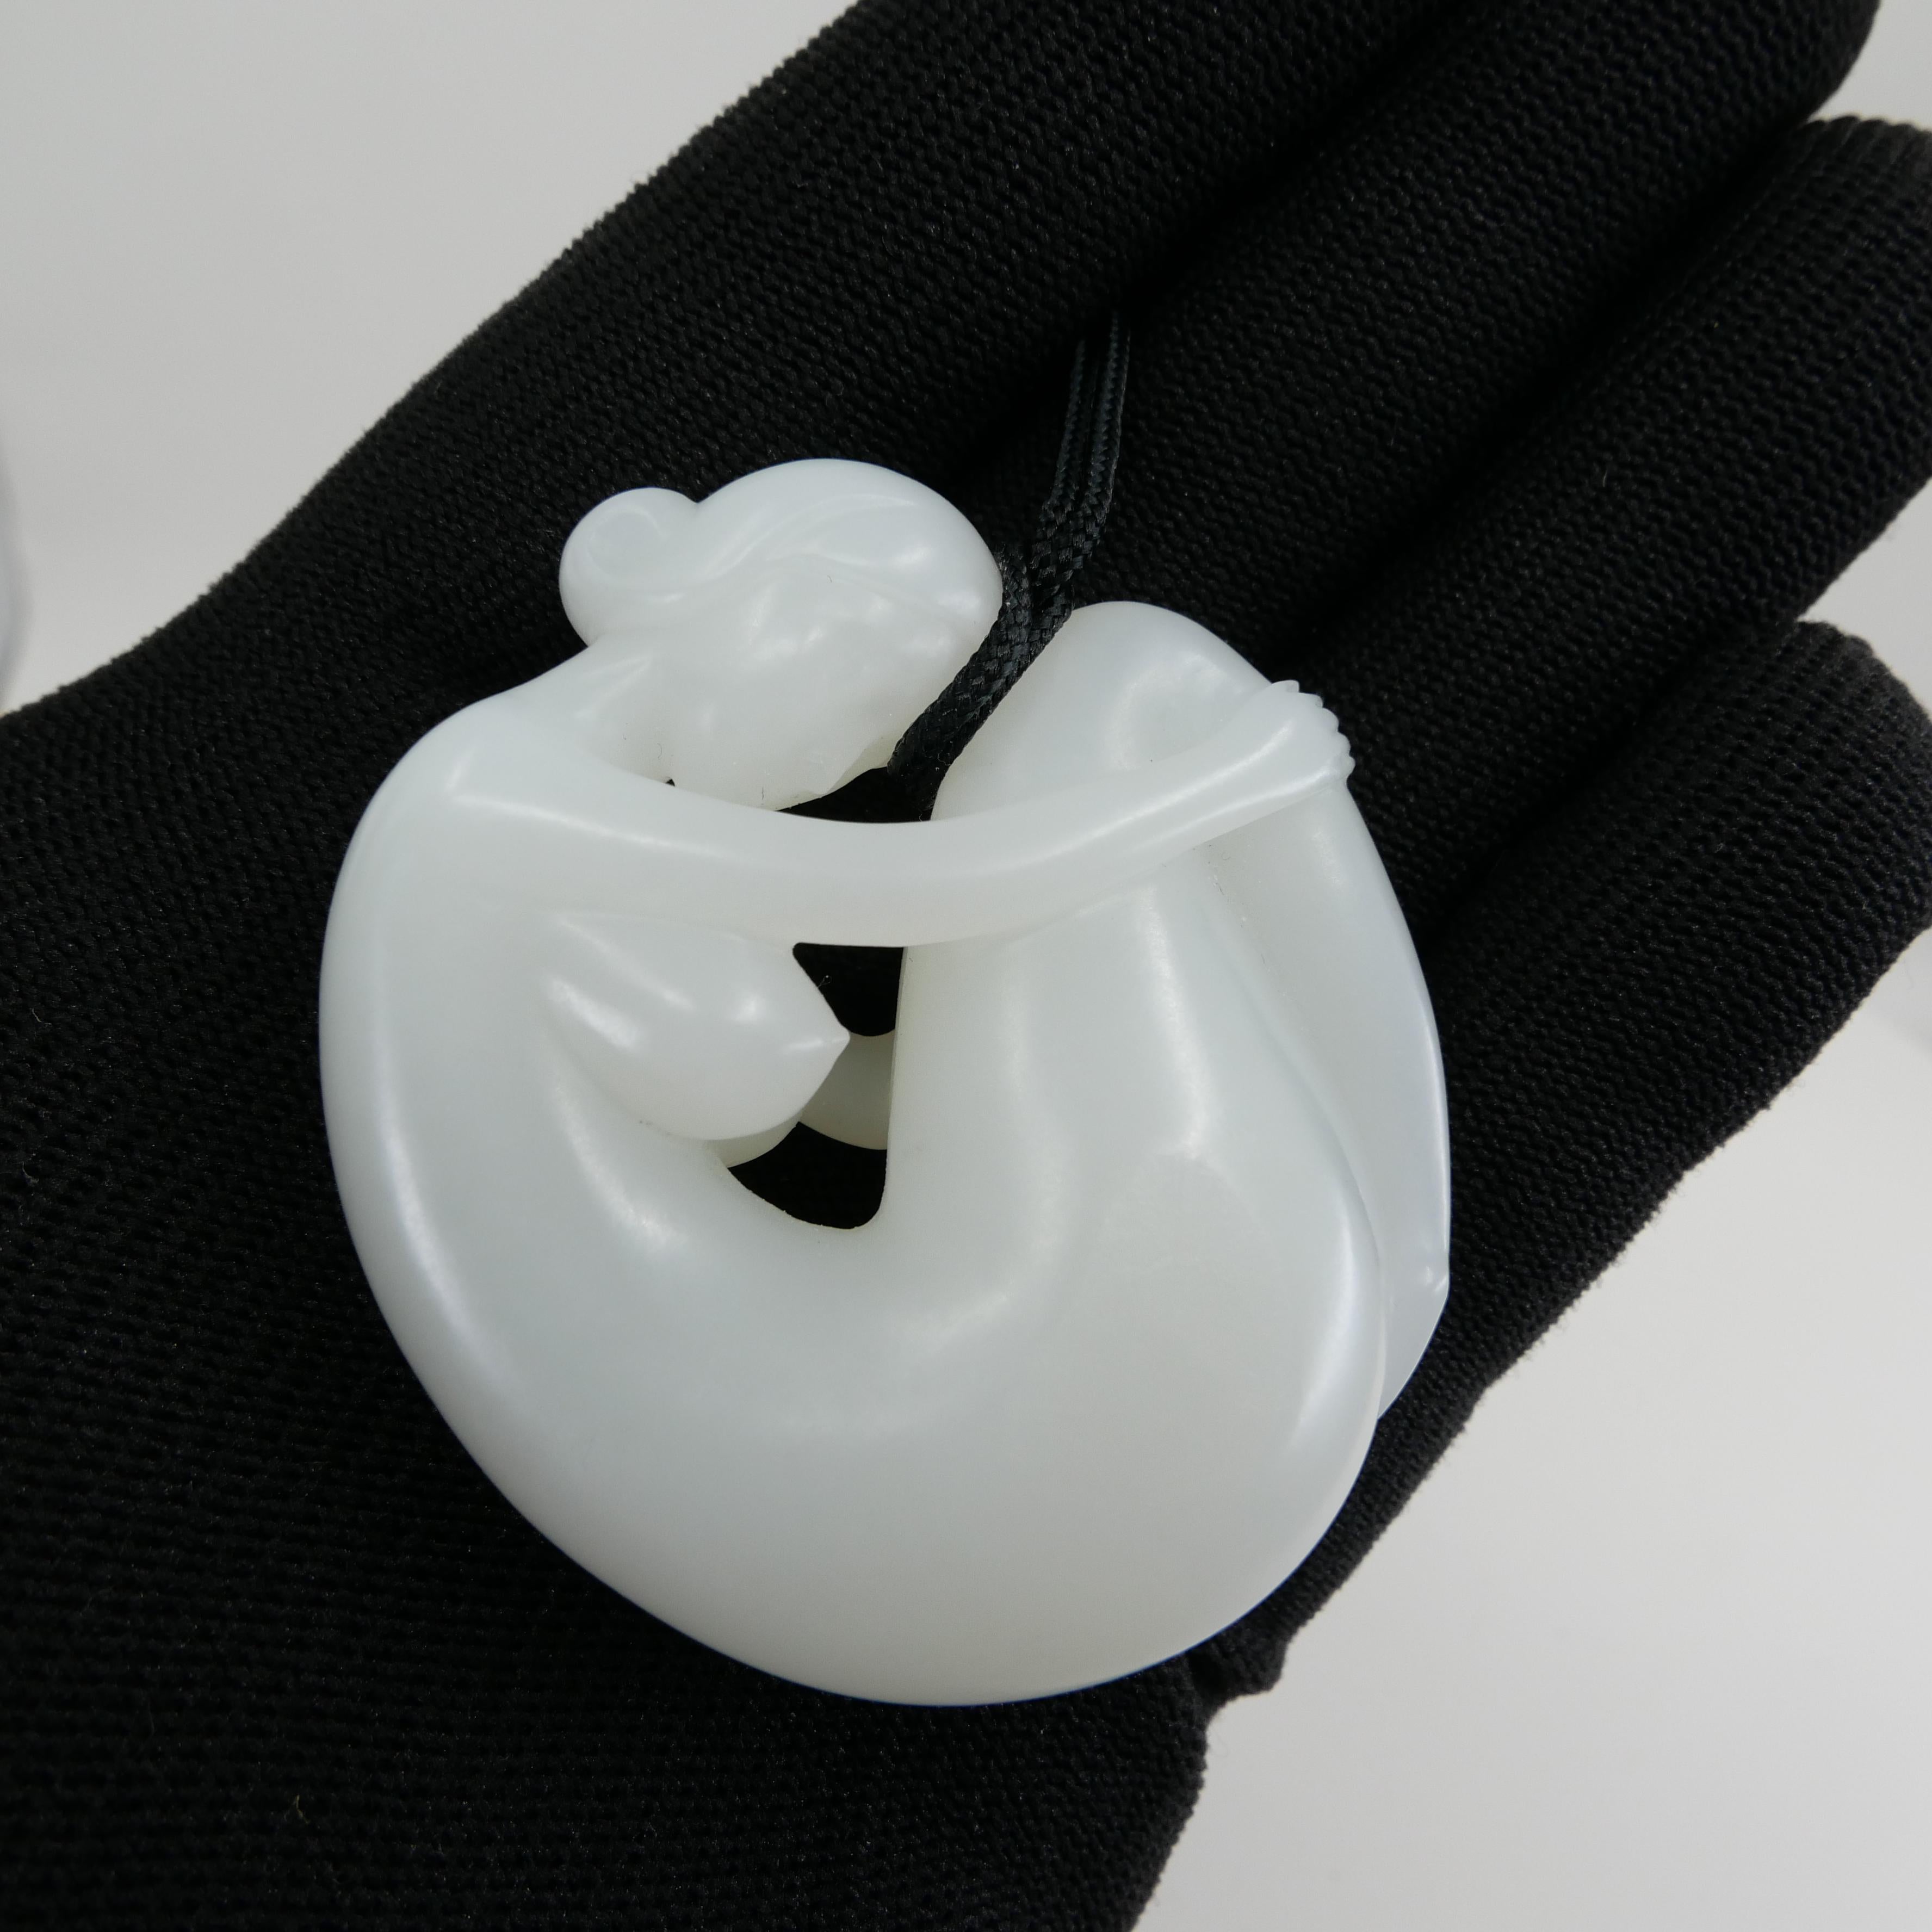 Rough Cut True Mutton Fat White Jade Certified Natural Nephrite Jade Carved by Master 于士榮. For Sale